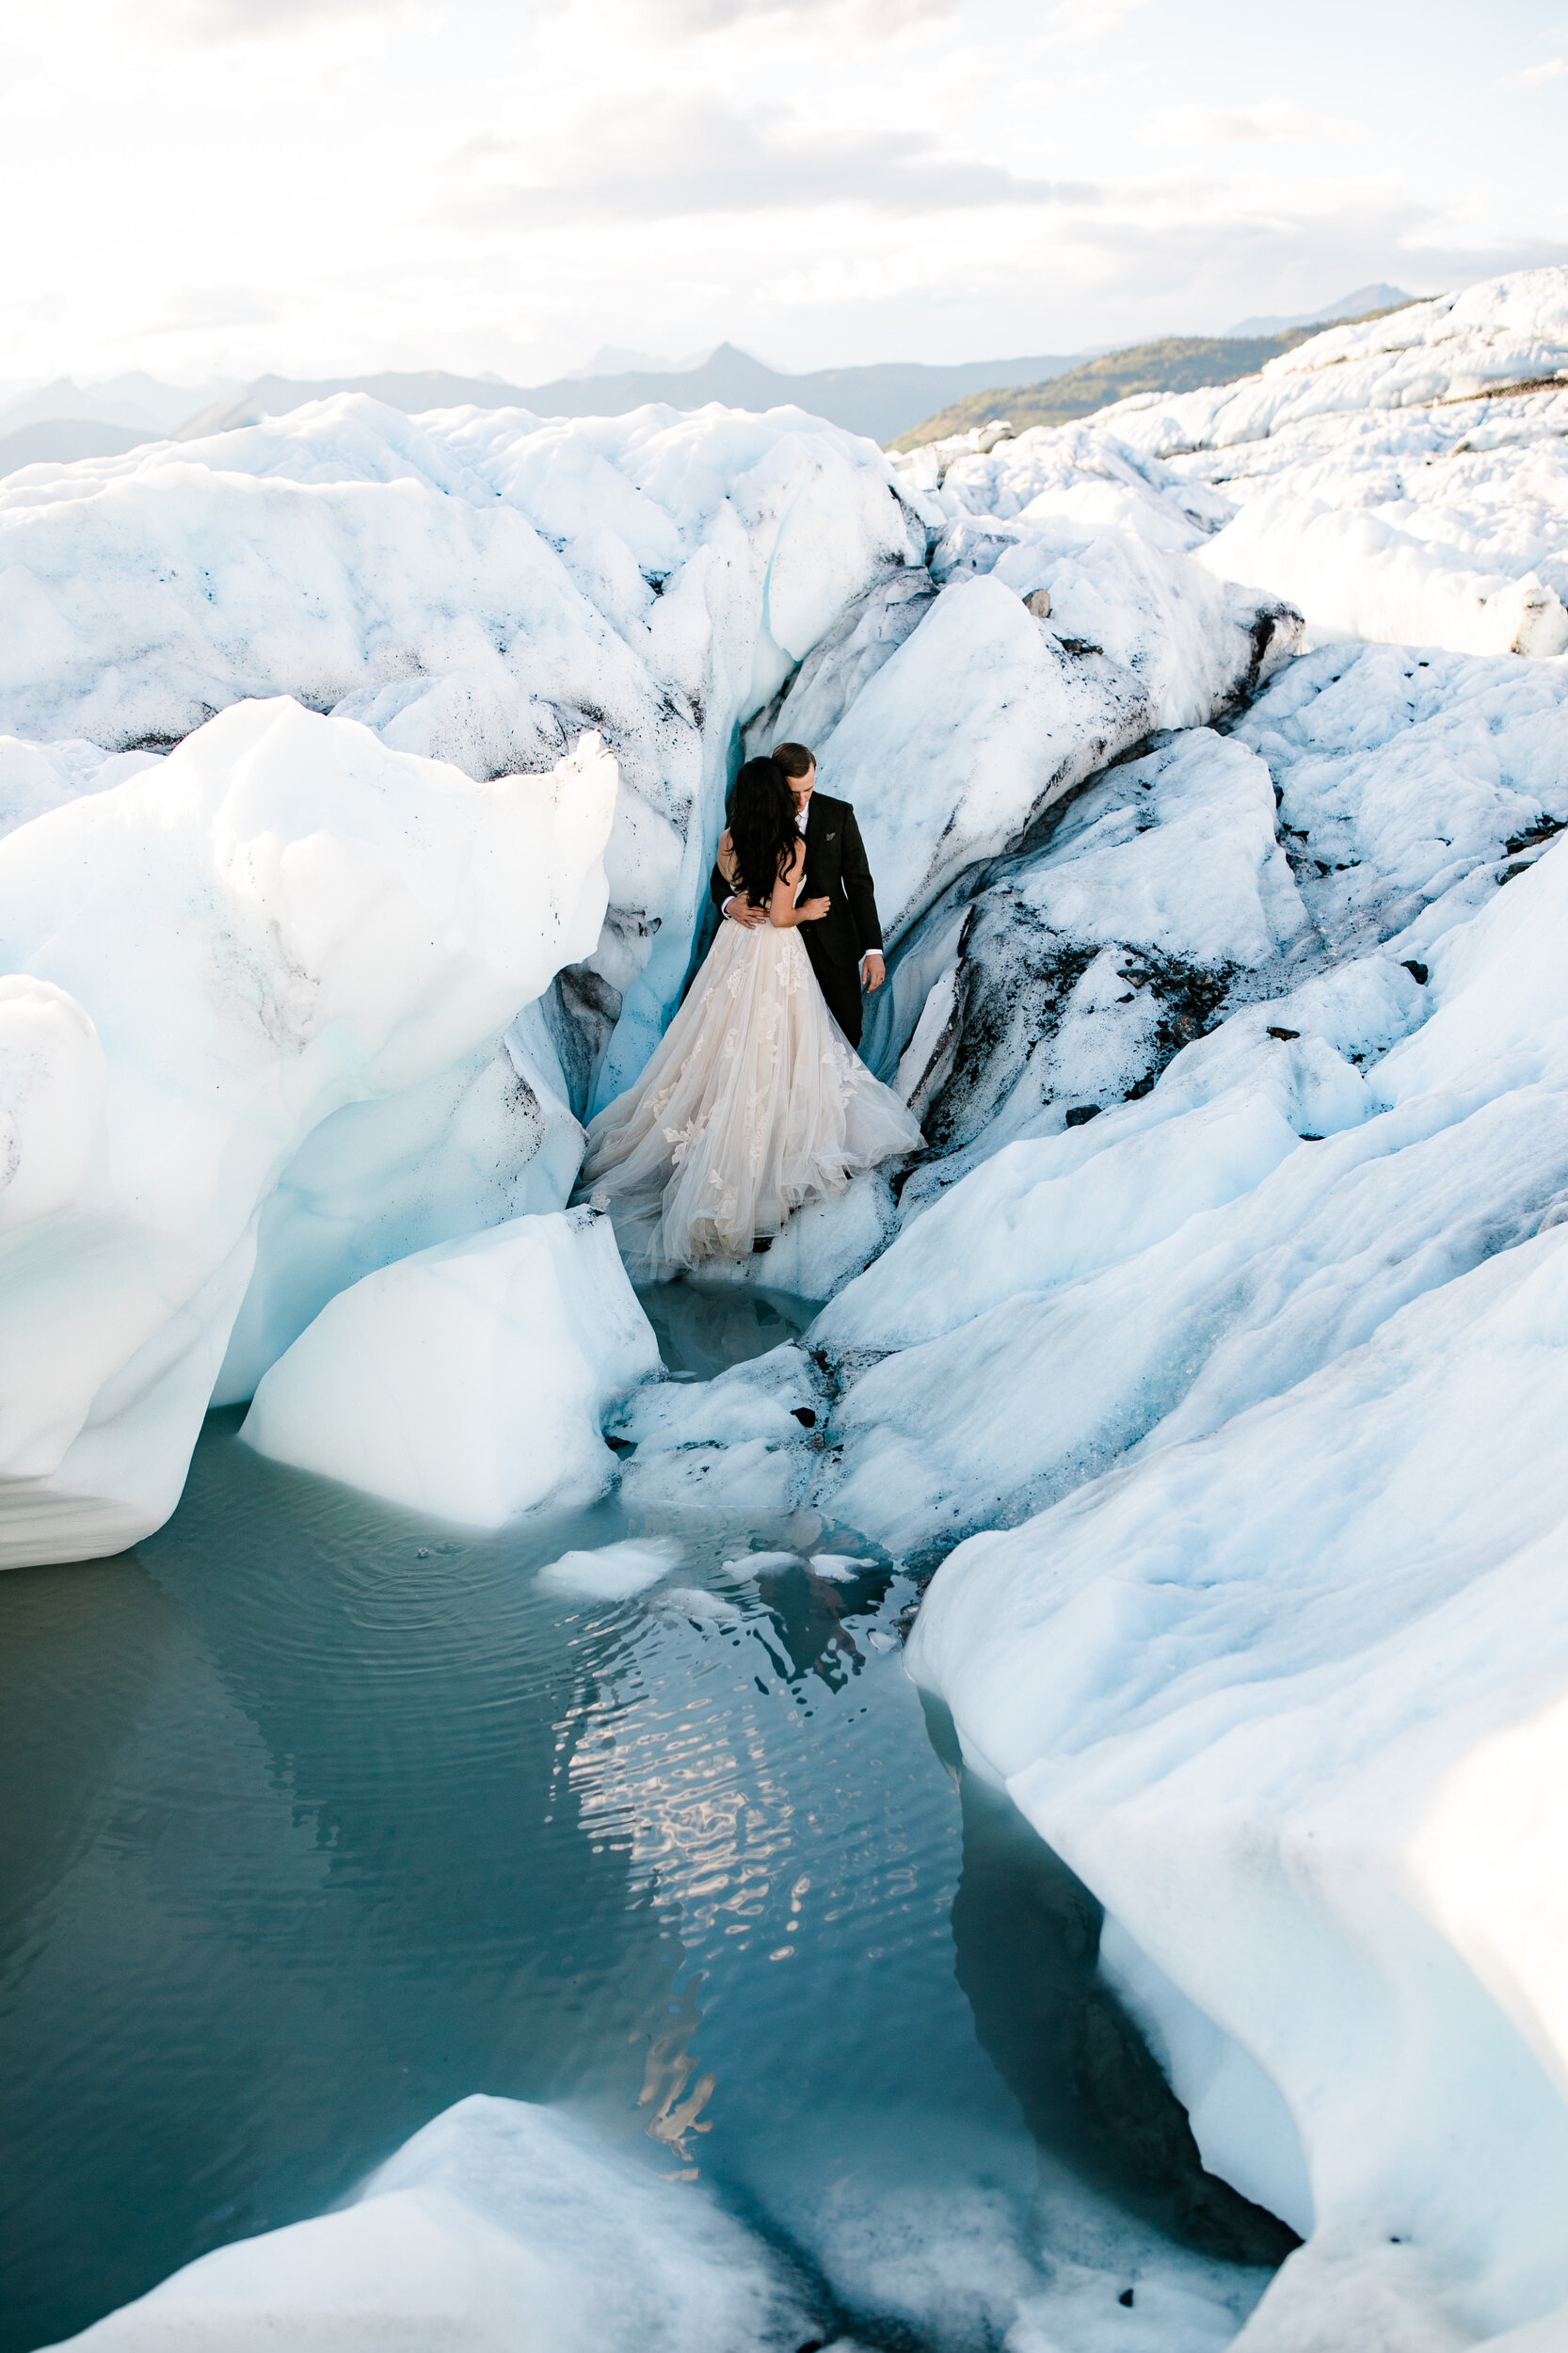 Alaska Elopement on a Glacier | Best of 2020, Our Favorite Wedding Photos of the Year | The Hearnes Adventure Wedding Photography